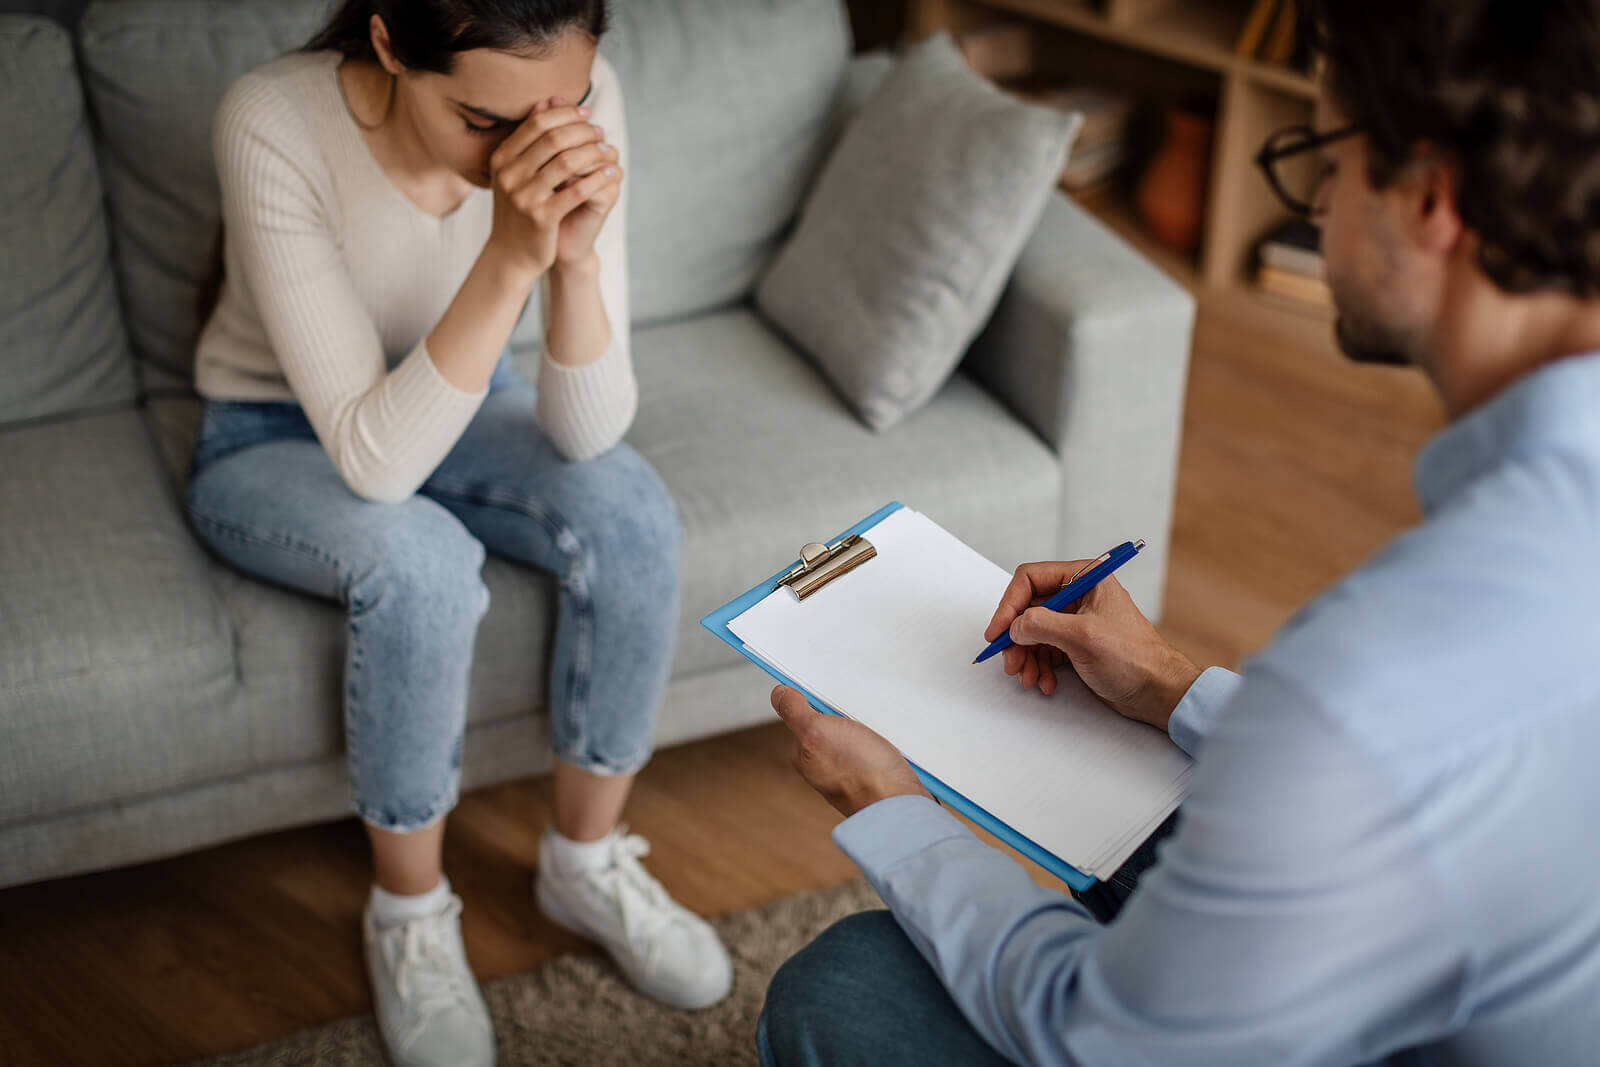 A woman hands her head while sitting across from a person with a clipboard. This could represent the support an equestrian therapist Branchburg, NJ can offer. Learn more about the help equestrian therapy in New Jersey can offer by searching for EMDR therapy in Branchburg, NJ today.